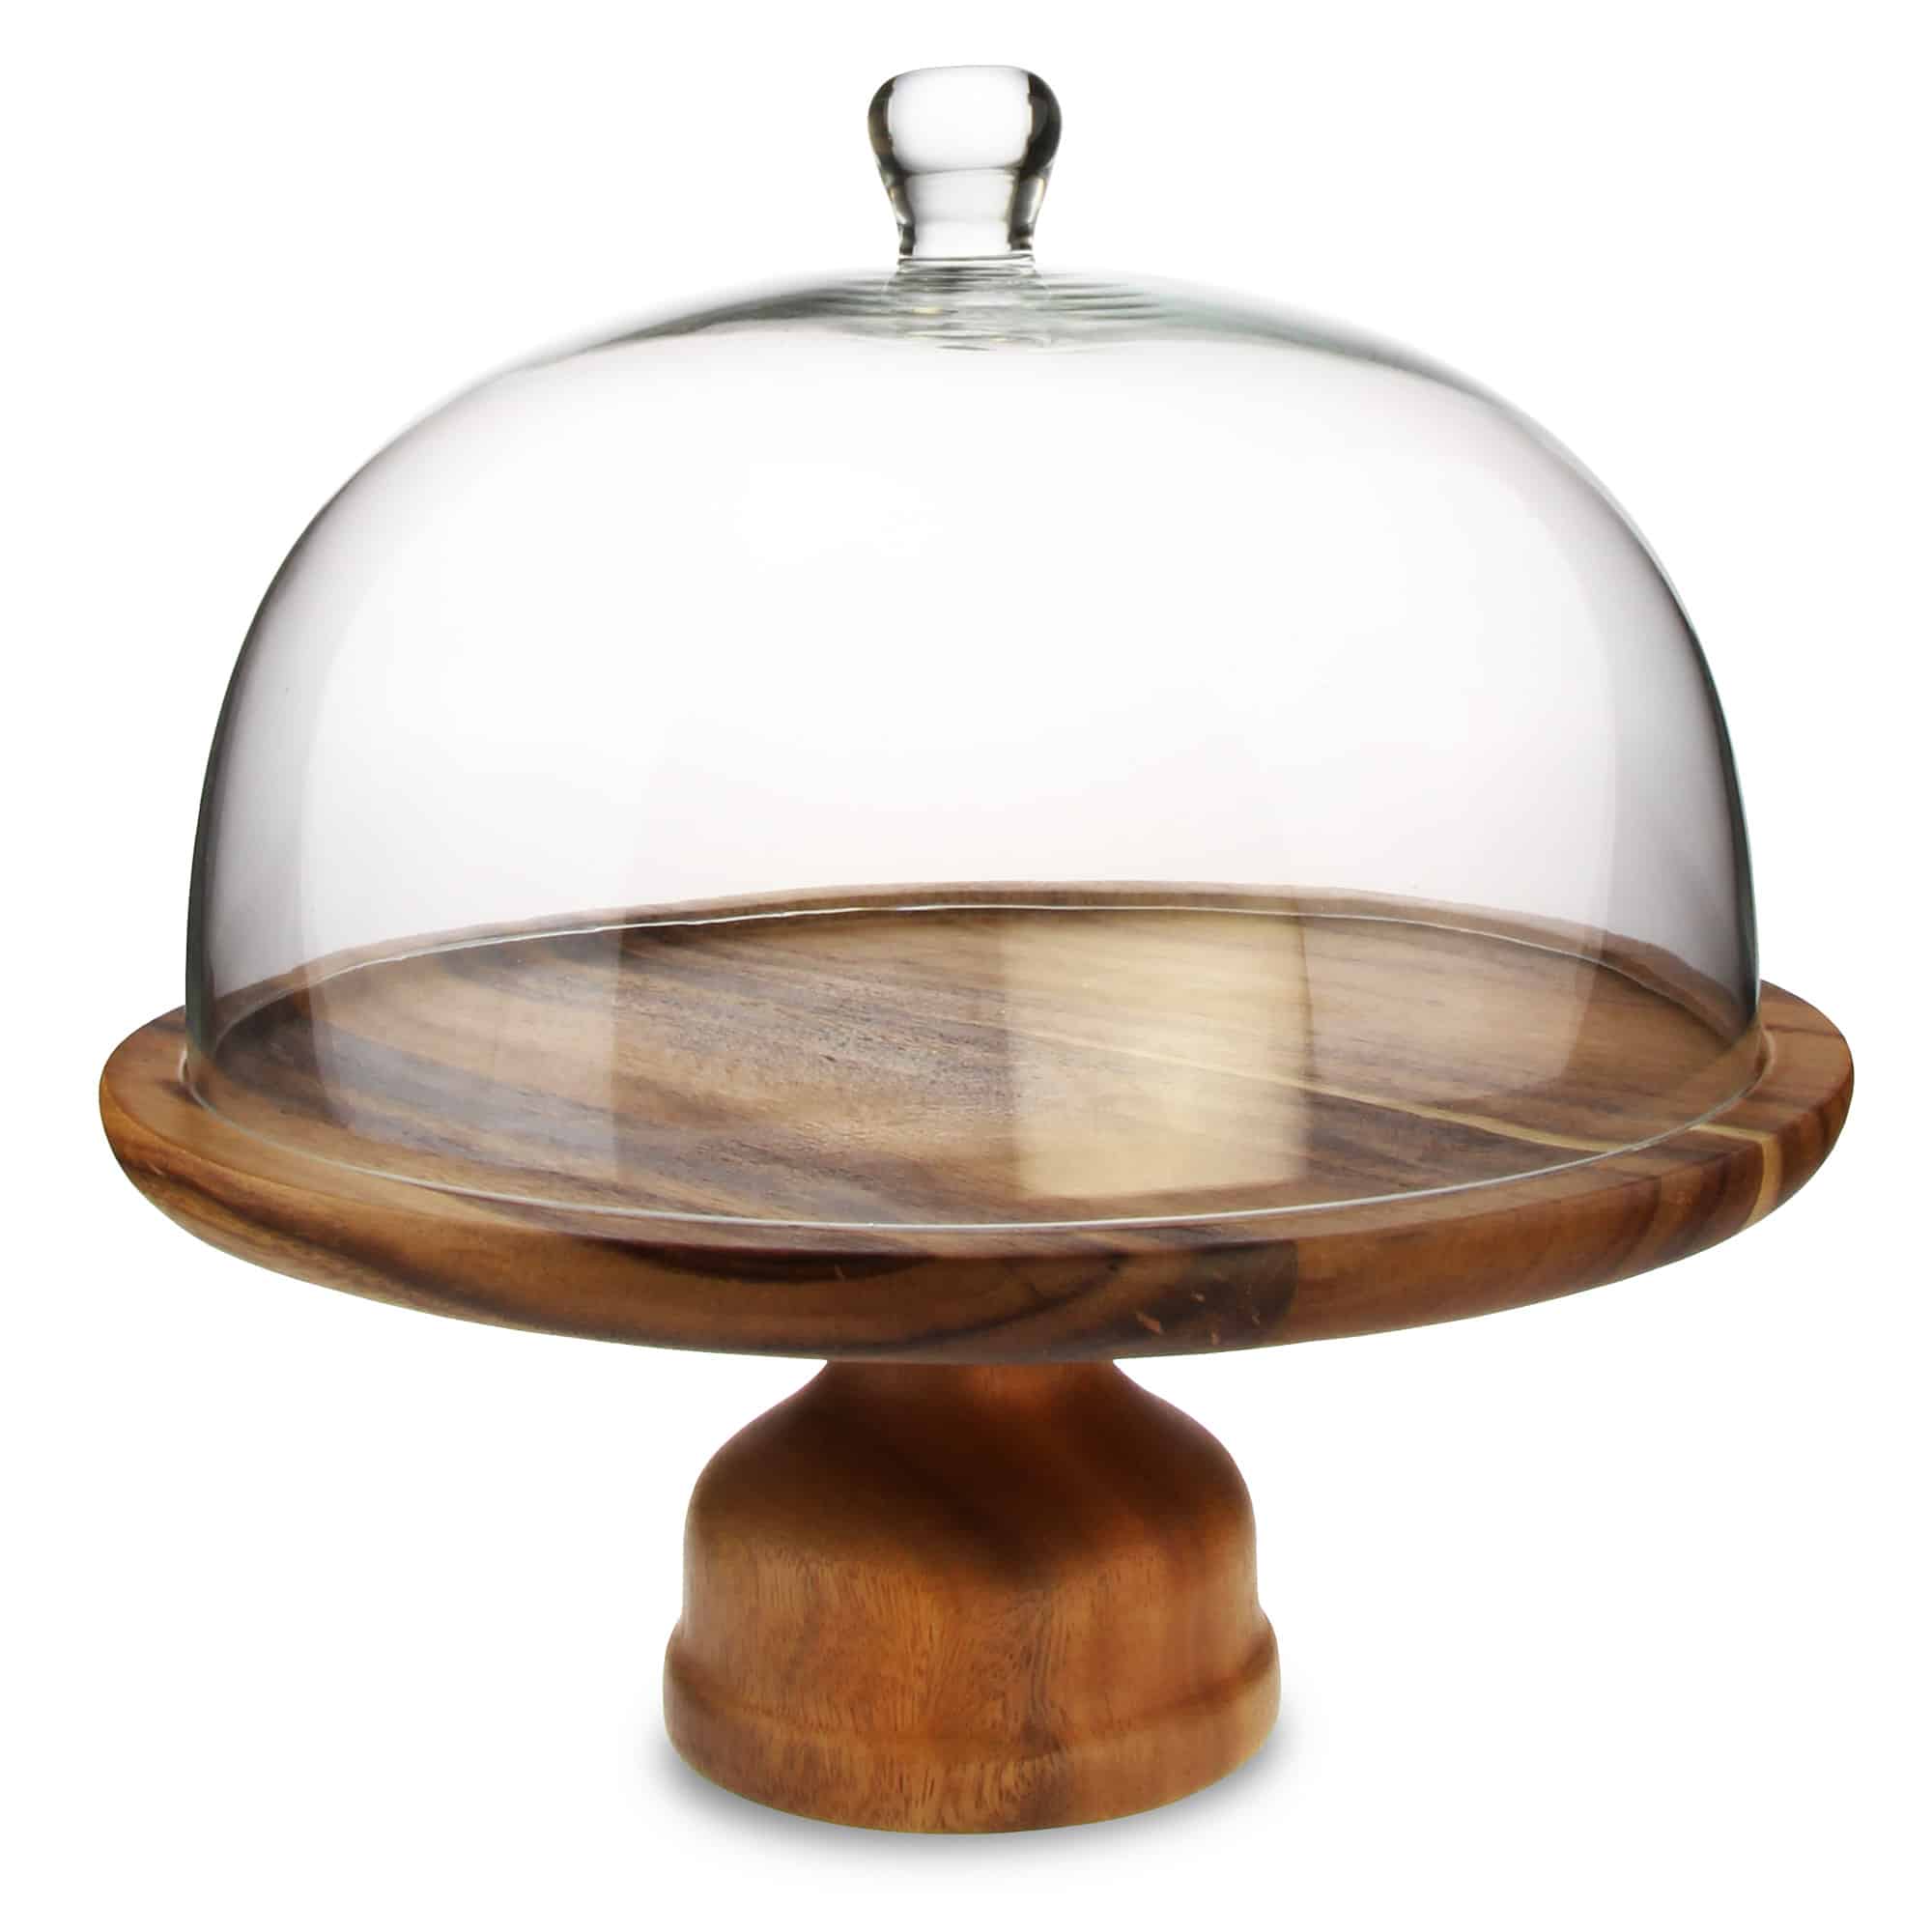 Genware Wooden Cake Stand and Dome Set at drinkstuff.com